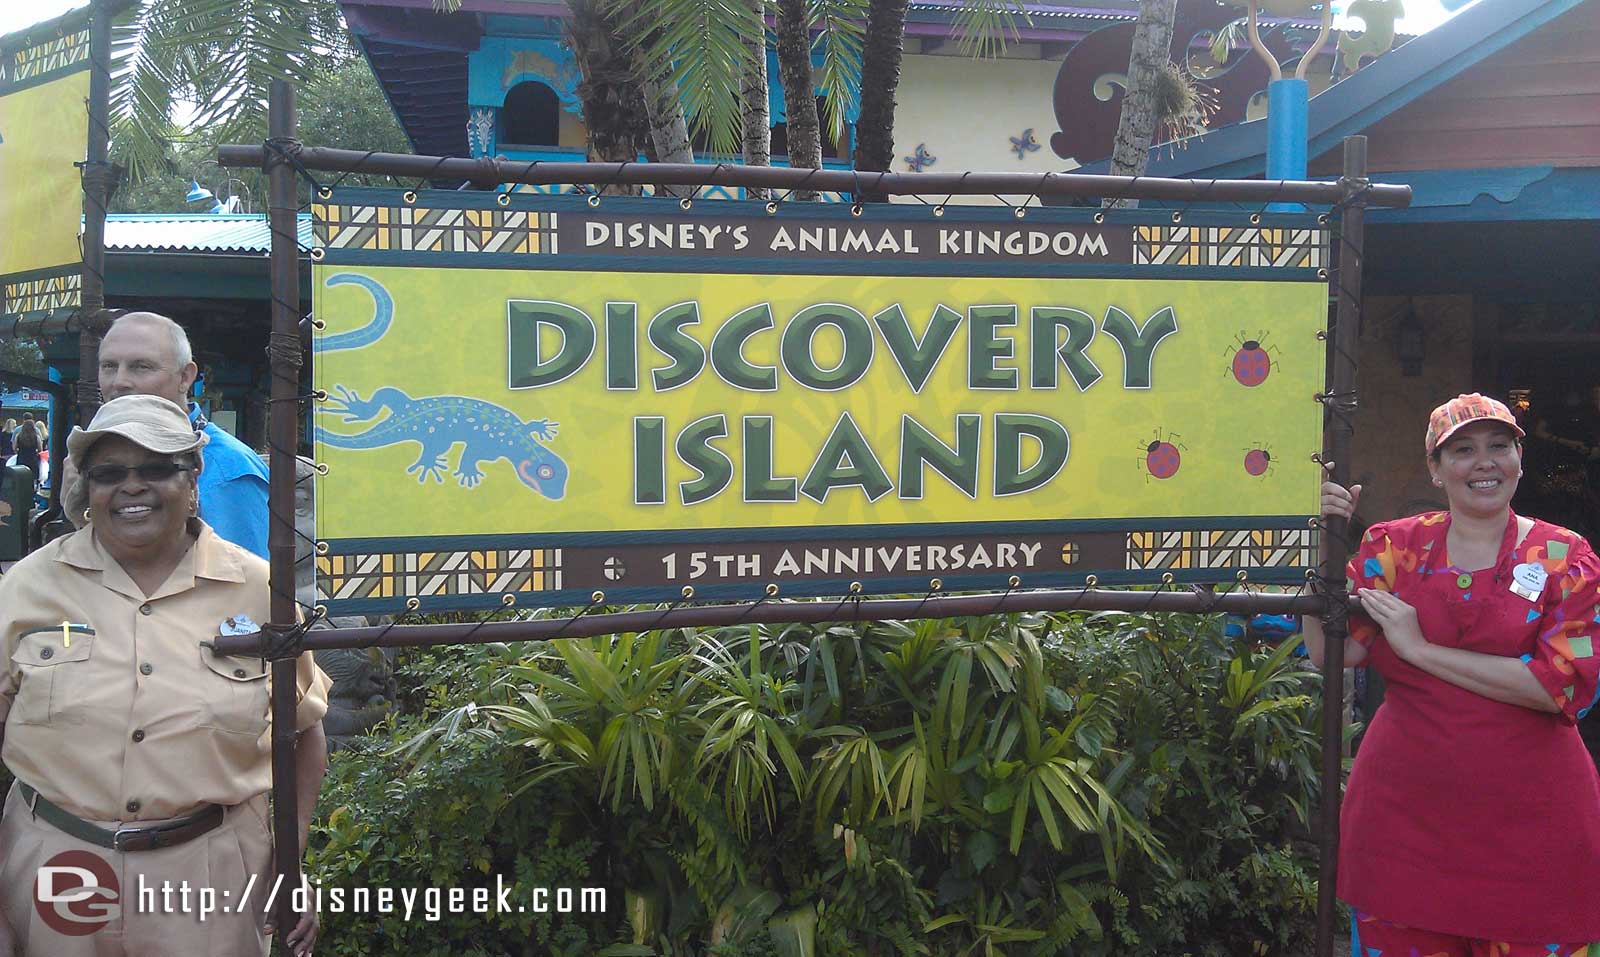 The Discovery Island banner DAK15